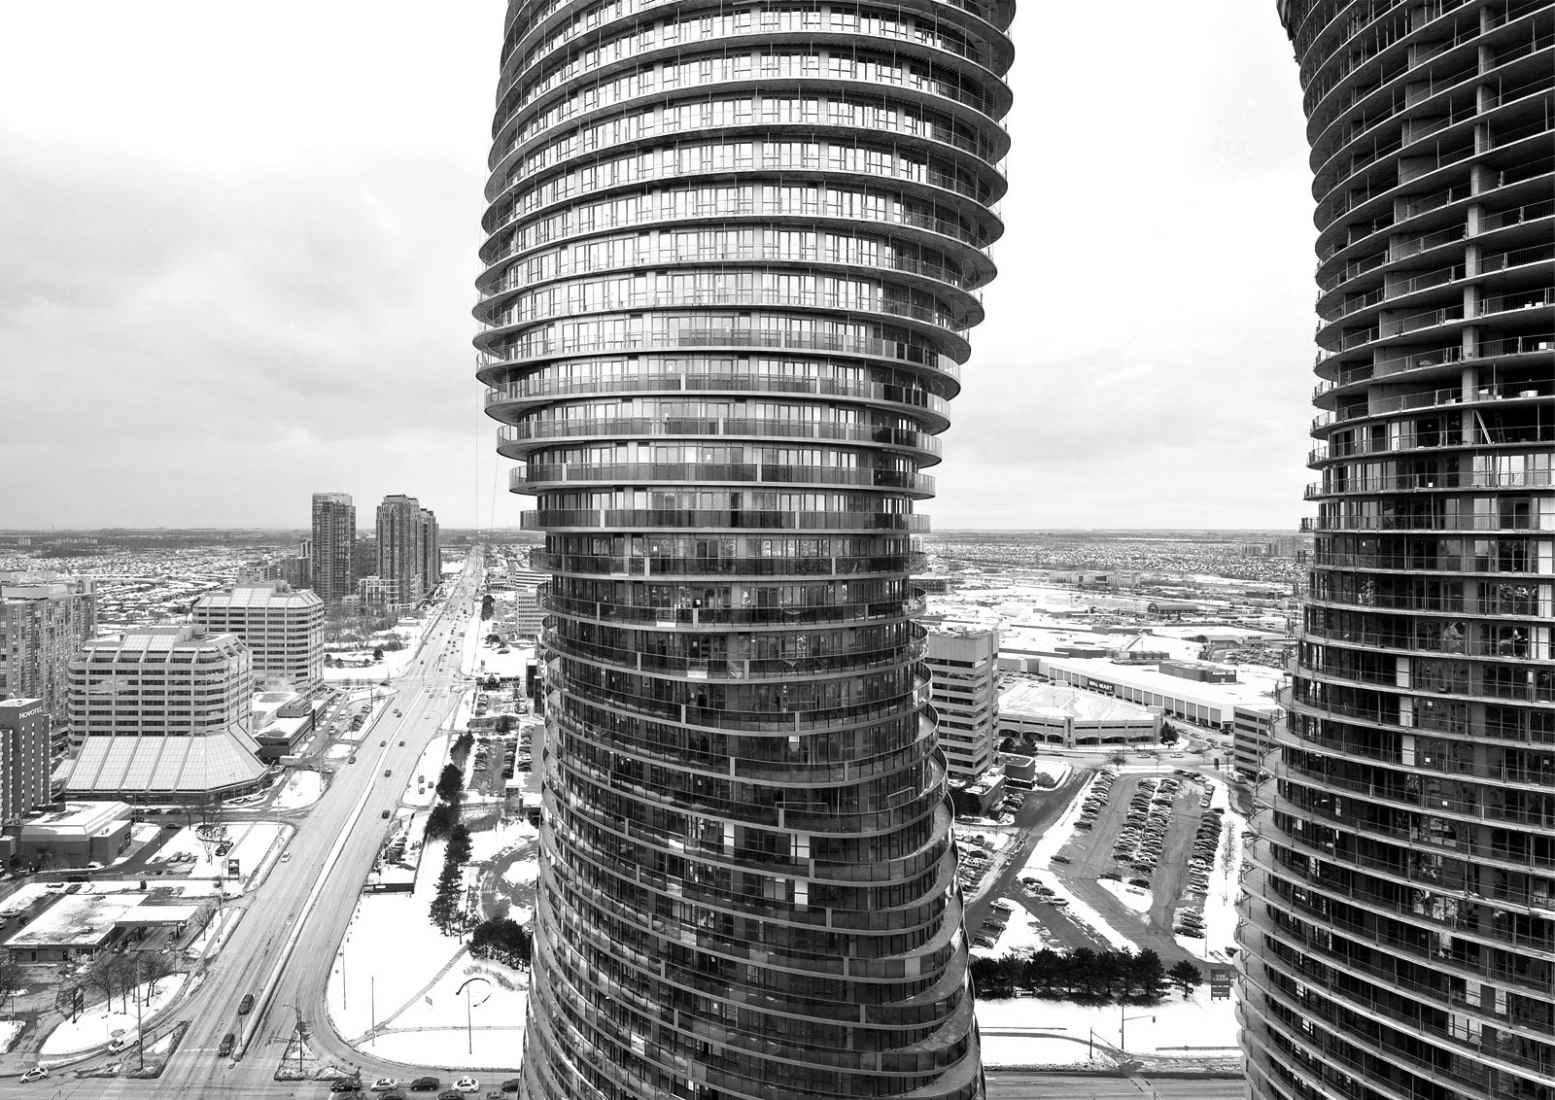 The Absolute Towers, 2 residential towers near Toronto designed by MAD, topped out last Friday at 170 meters, establishing MAD's bold new approach to residential design. 